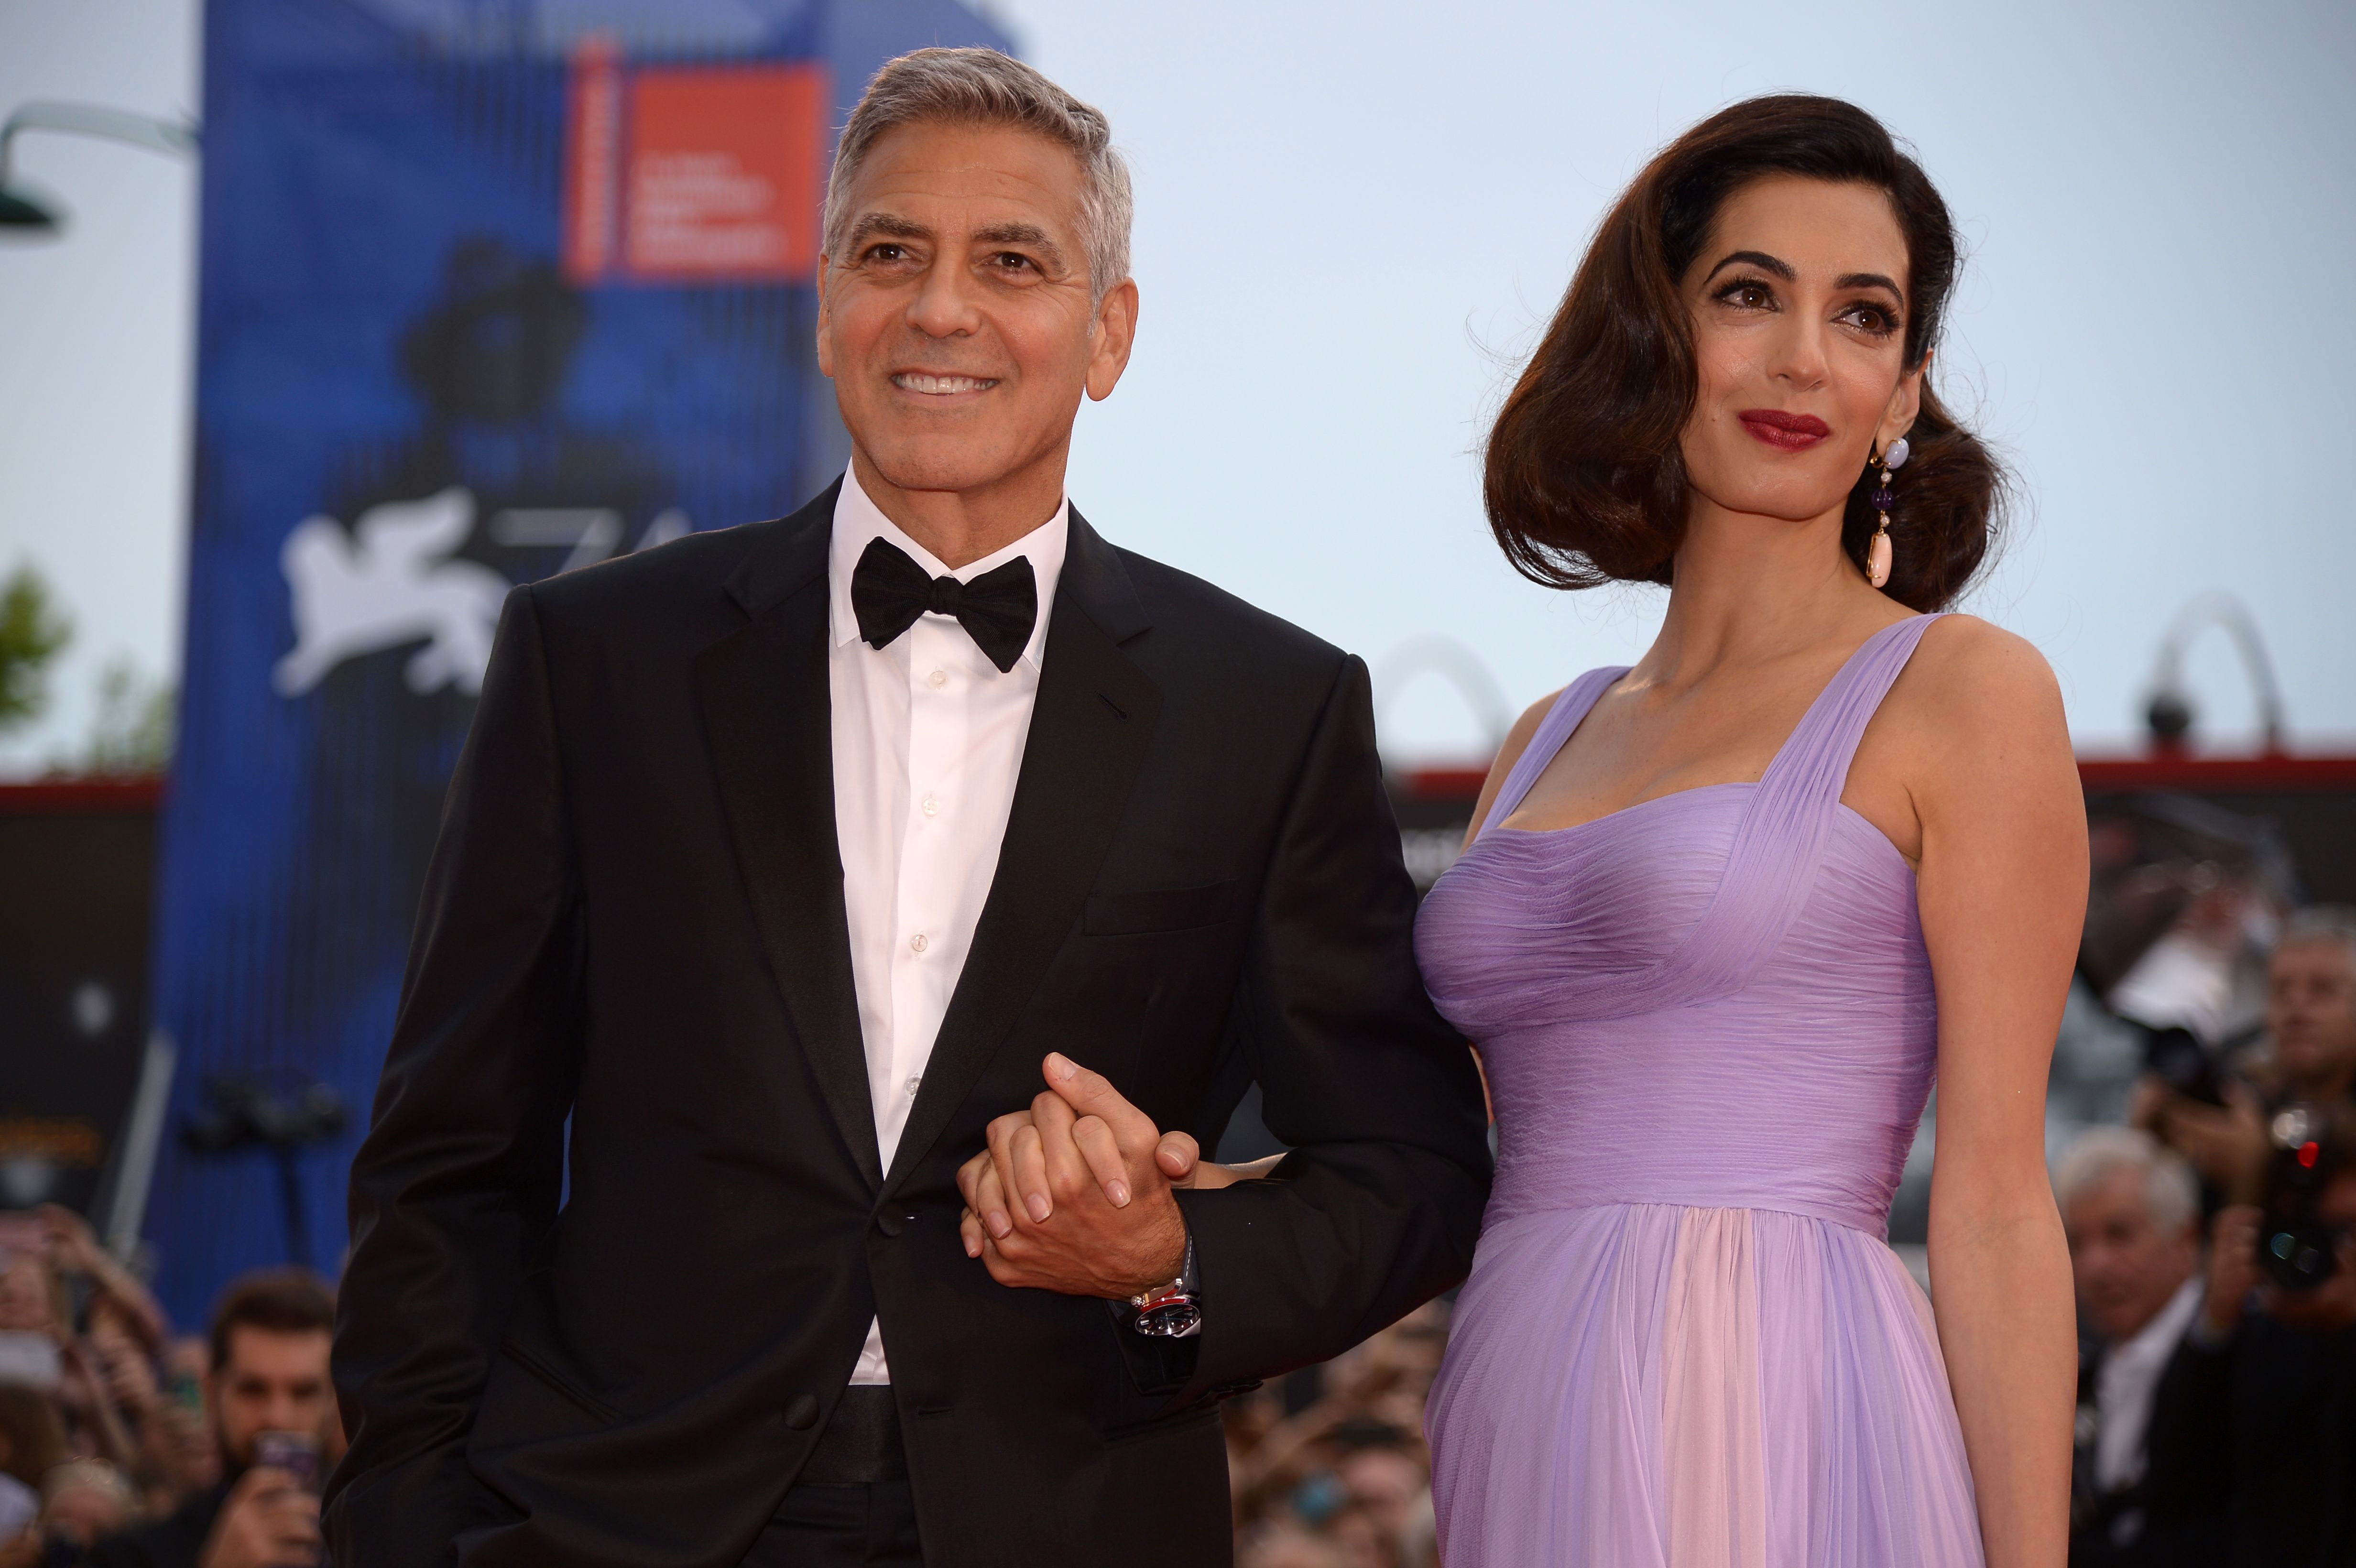 Hollywood actor and director George Clooney, accompanied by his wife Amal, graced the premiere of the movie "Suburbicon" at the 74th Venice Film Festival on the picturesque Venice Lido | Source: Getty Image